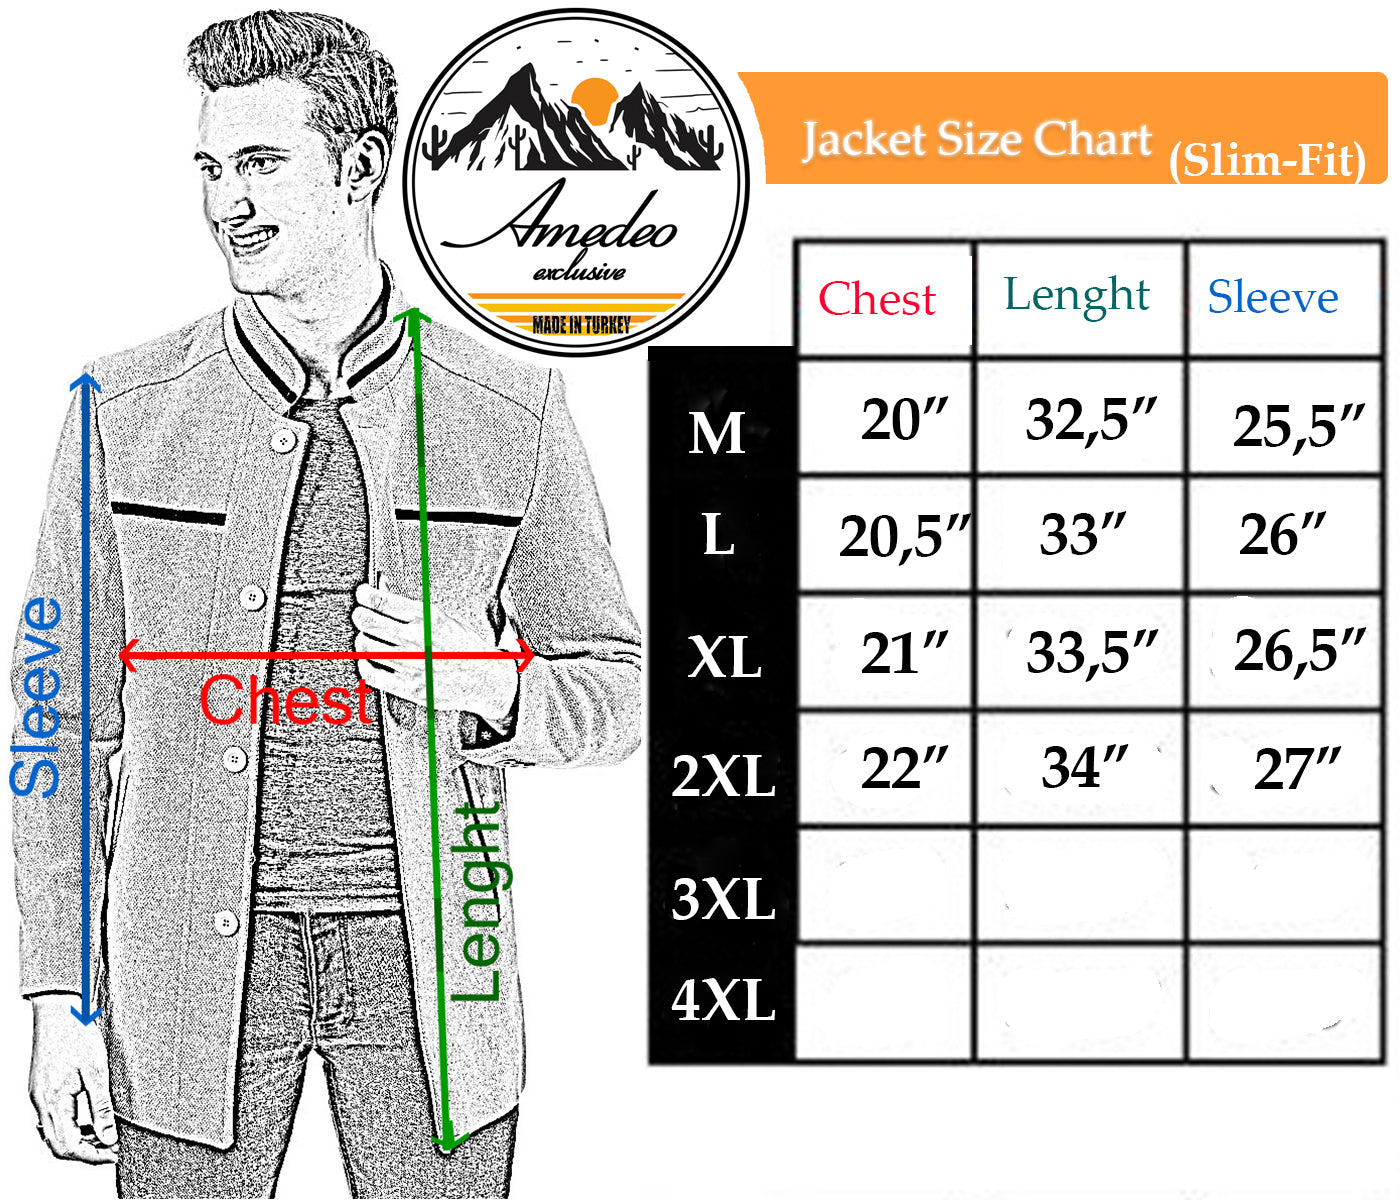 Men's European Brown Wool Coat Hooded Jacket Tailor fit Fine Luxury Quality Work and Casual